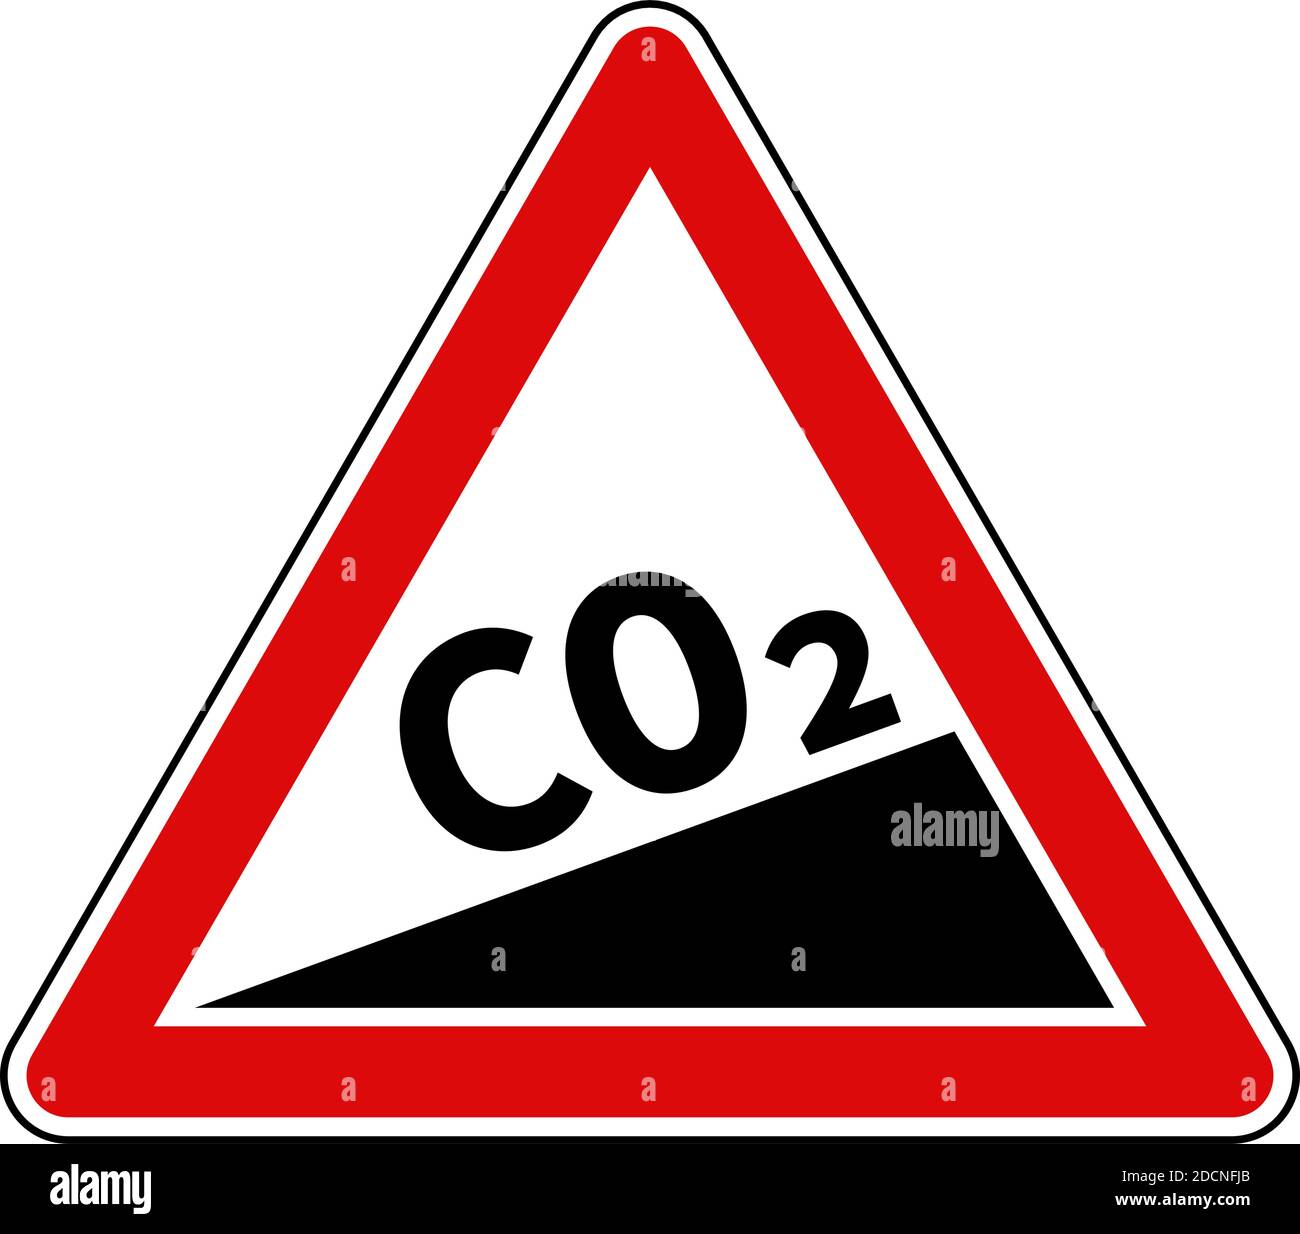 CO2 emission rising sign red triangular shape vector illustration Stock Vector